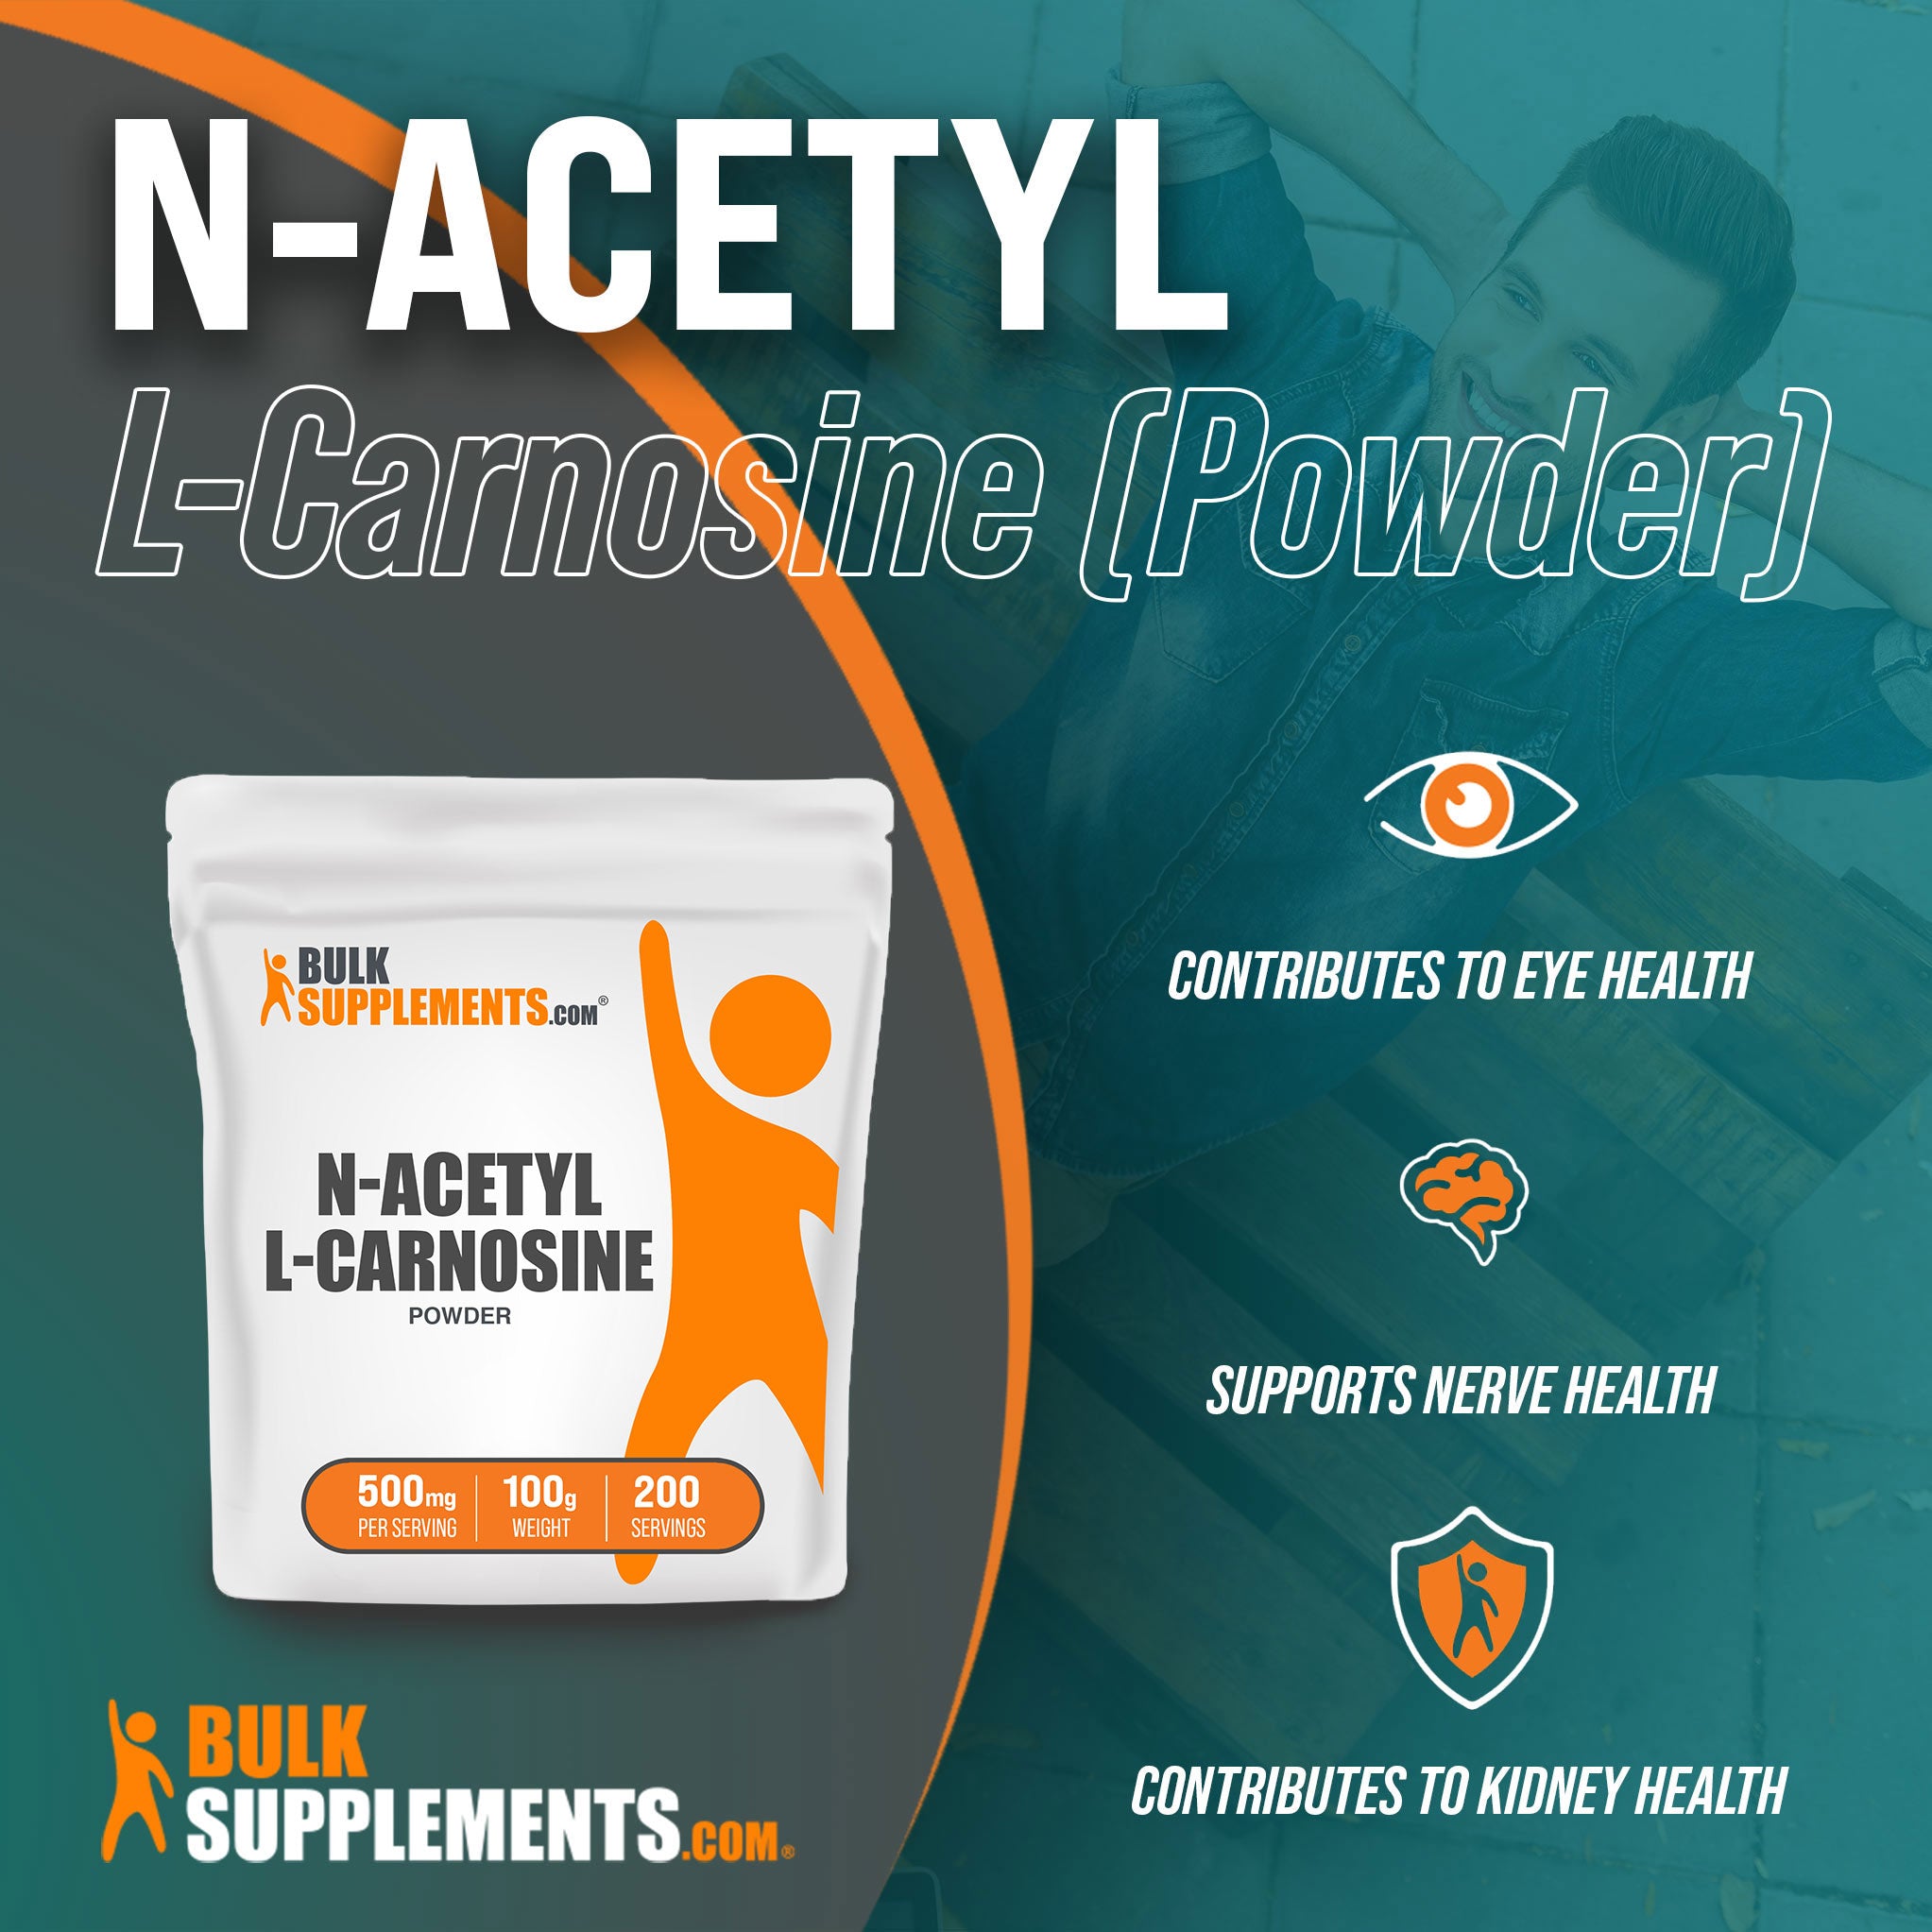 Benefits of N-Acetyl L-Carnosine: contributes to eye health, supports nerve health, contributes to kidney health